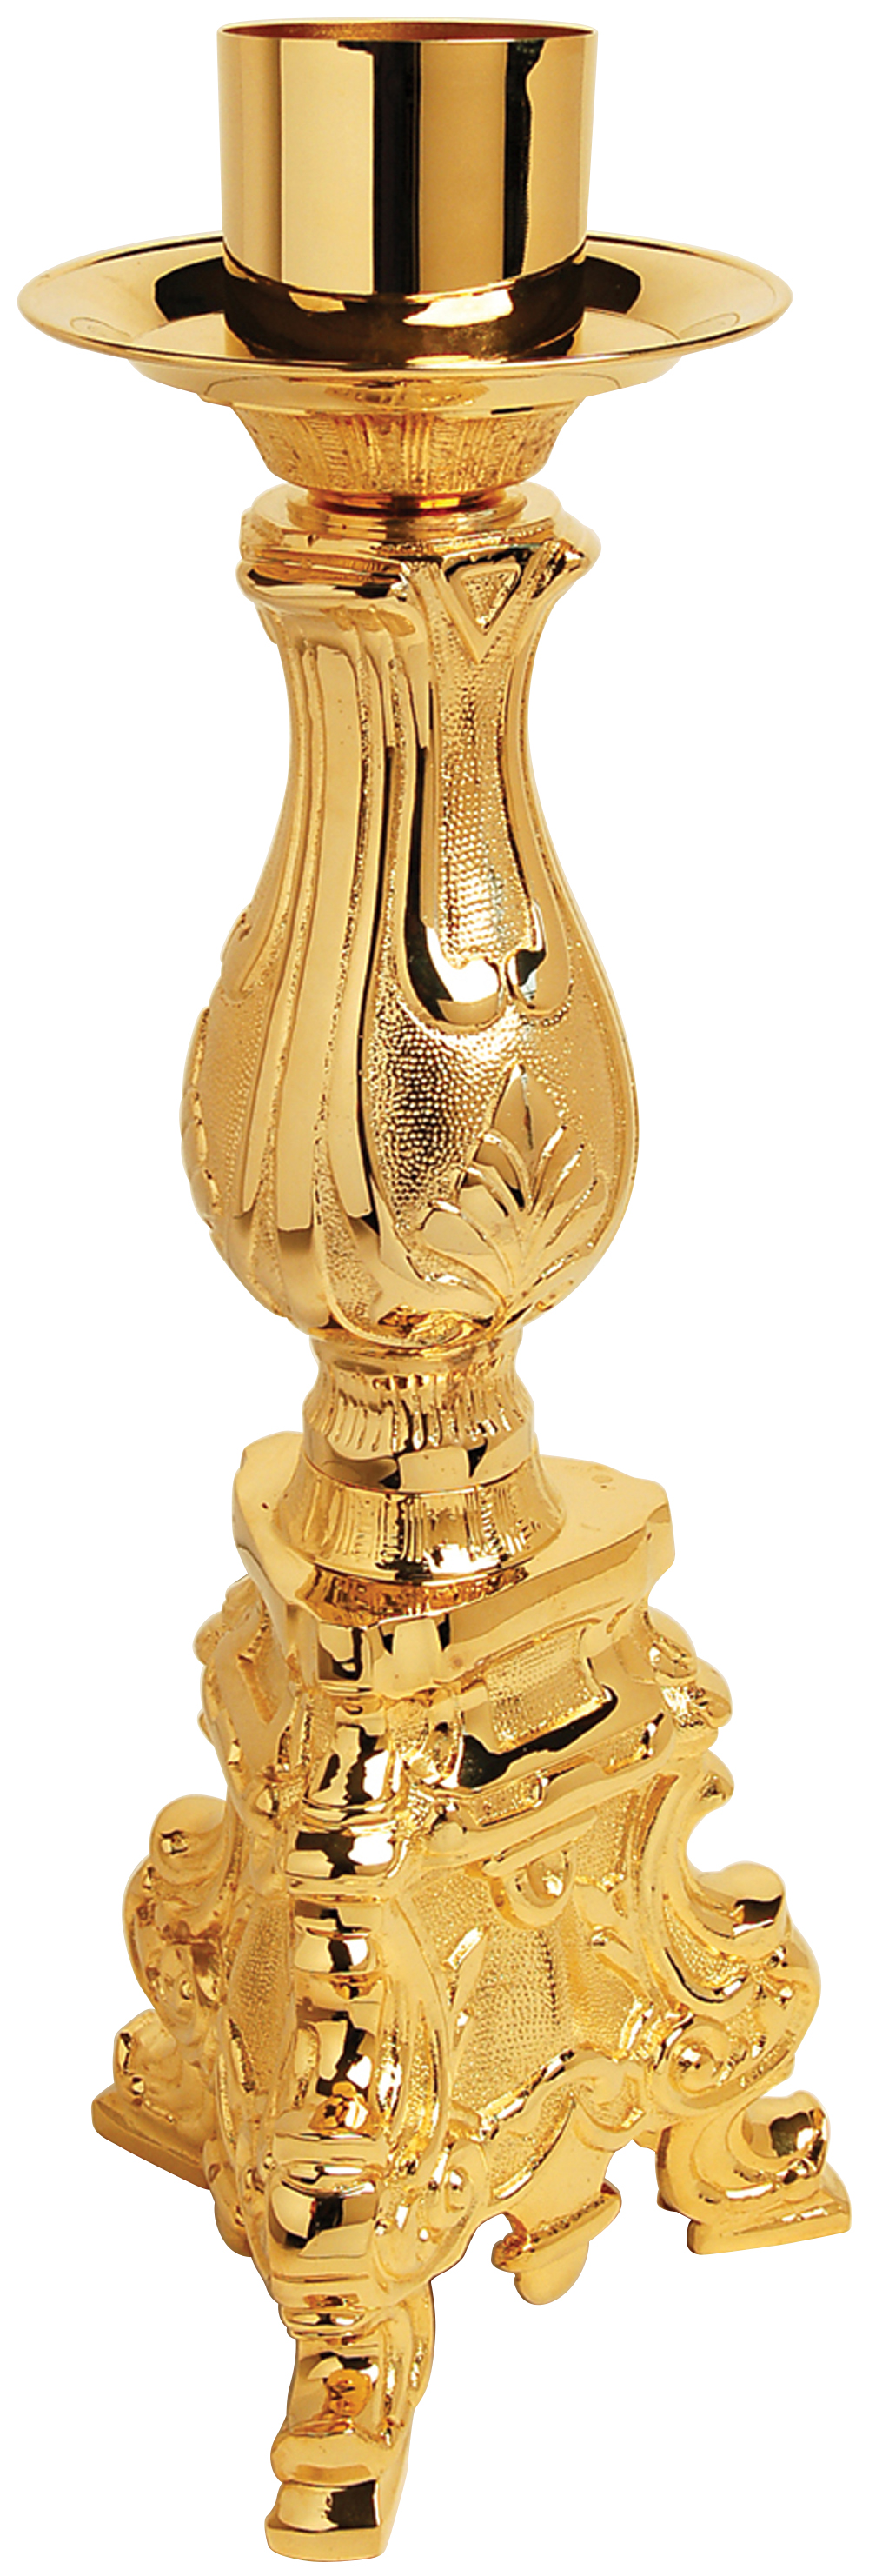 Paschal Candlestick 21 3/4 inch 24K Gold Plate 2 1/2 inch Socket